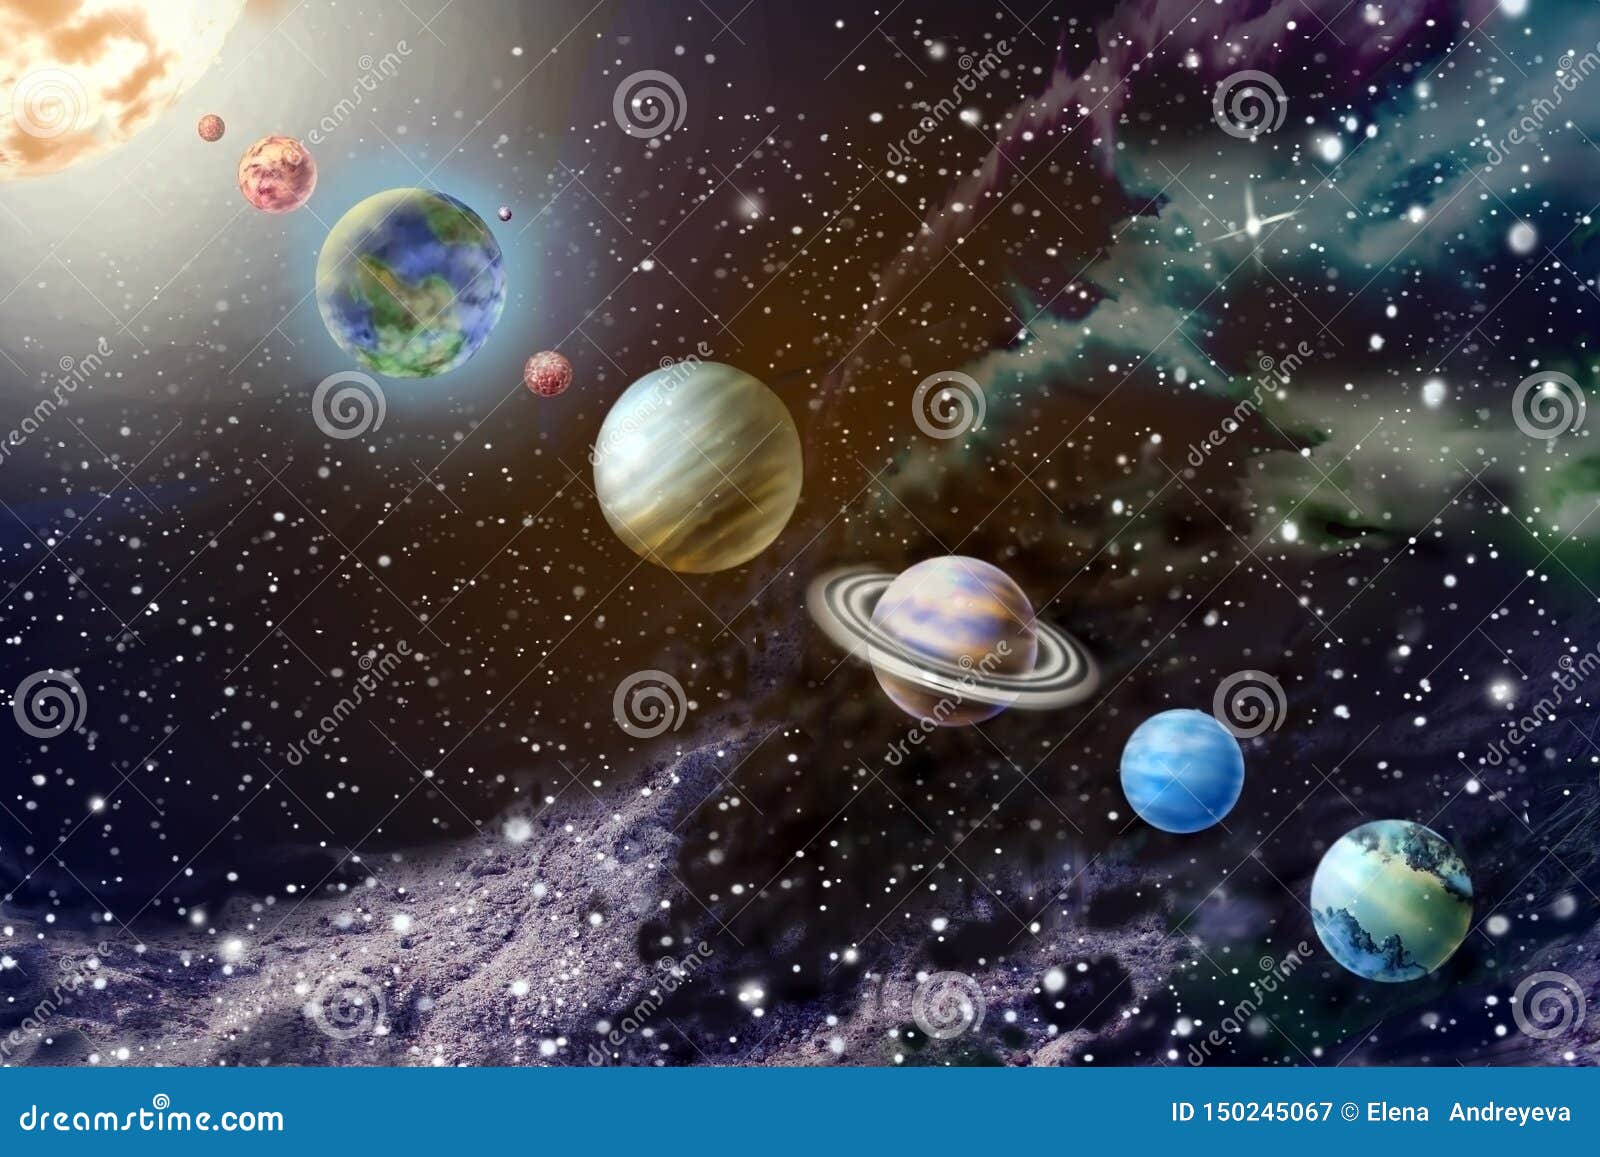 Planets Of The Solar System Stock Image Image Of Night